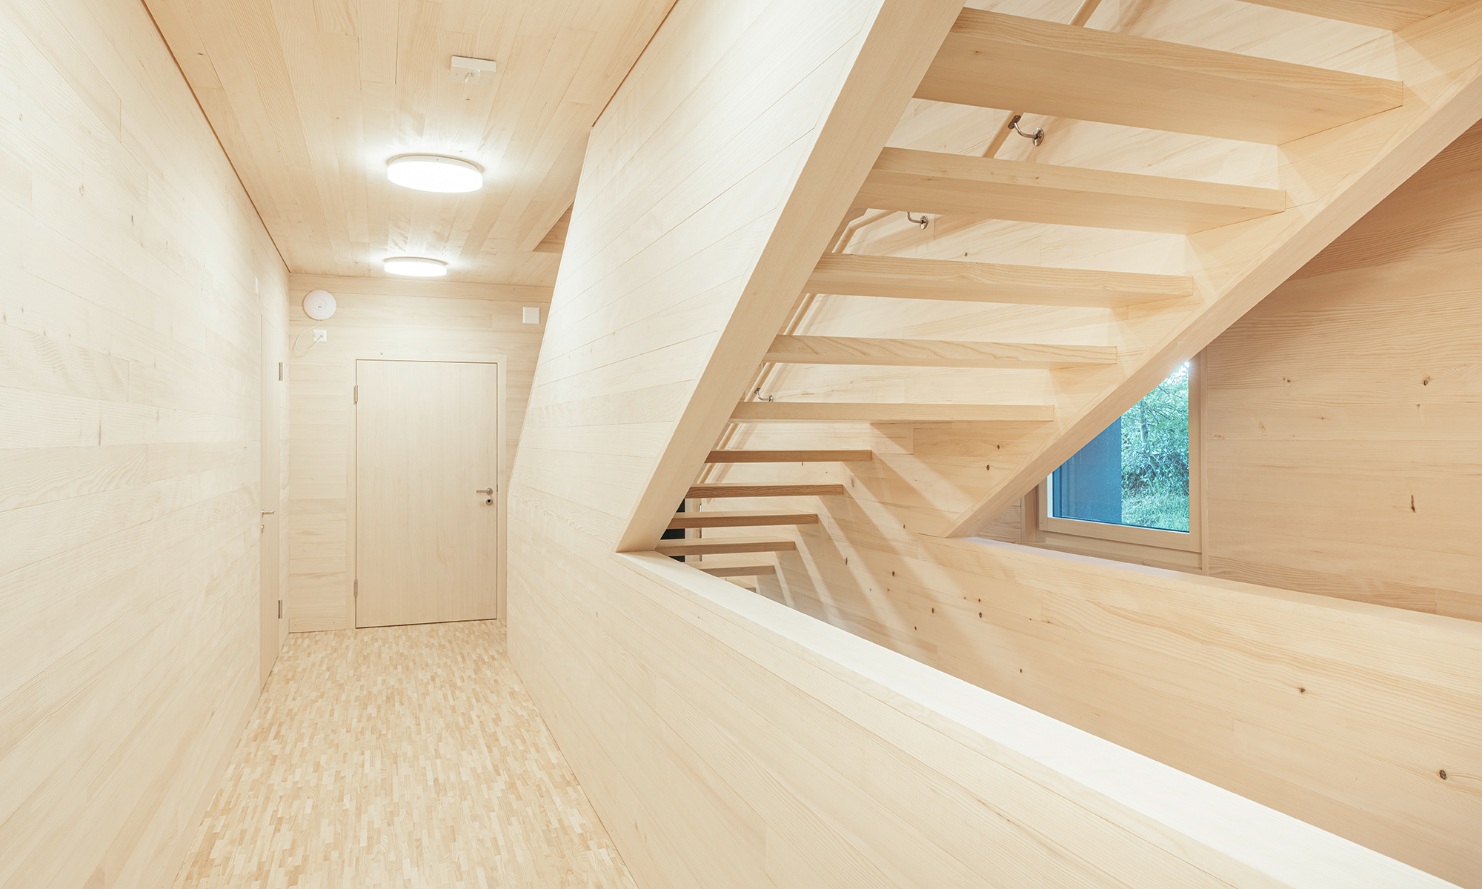 The staircase and hallway – including the walls, floors and ceiling – at the new daycare centre are made entirely of wood